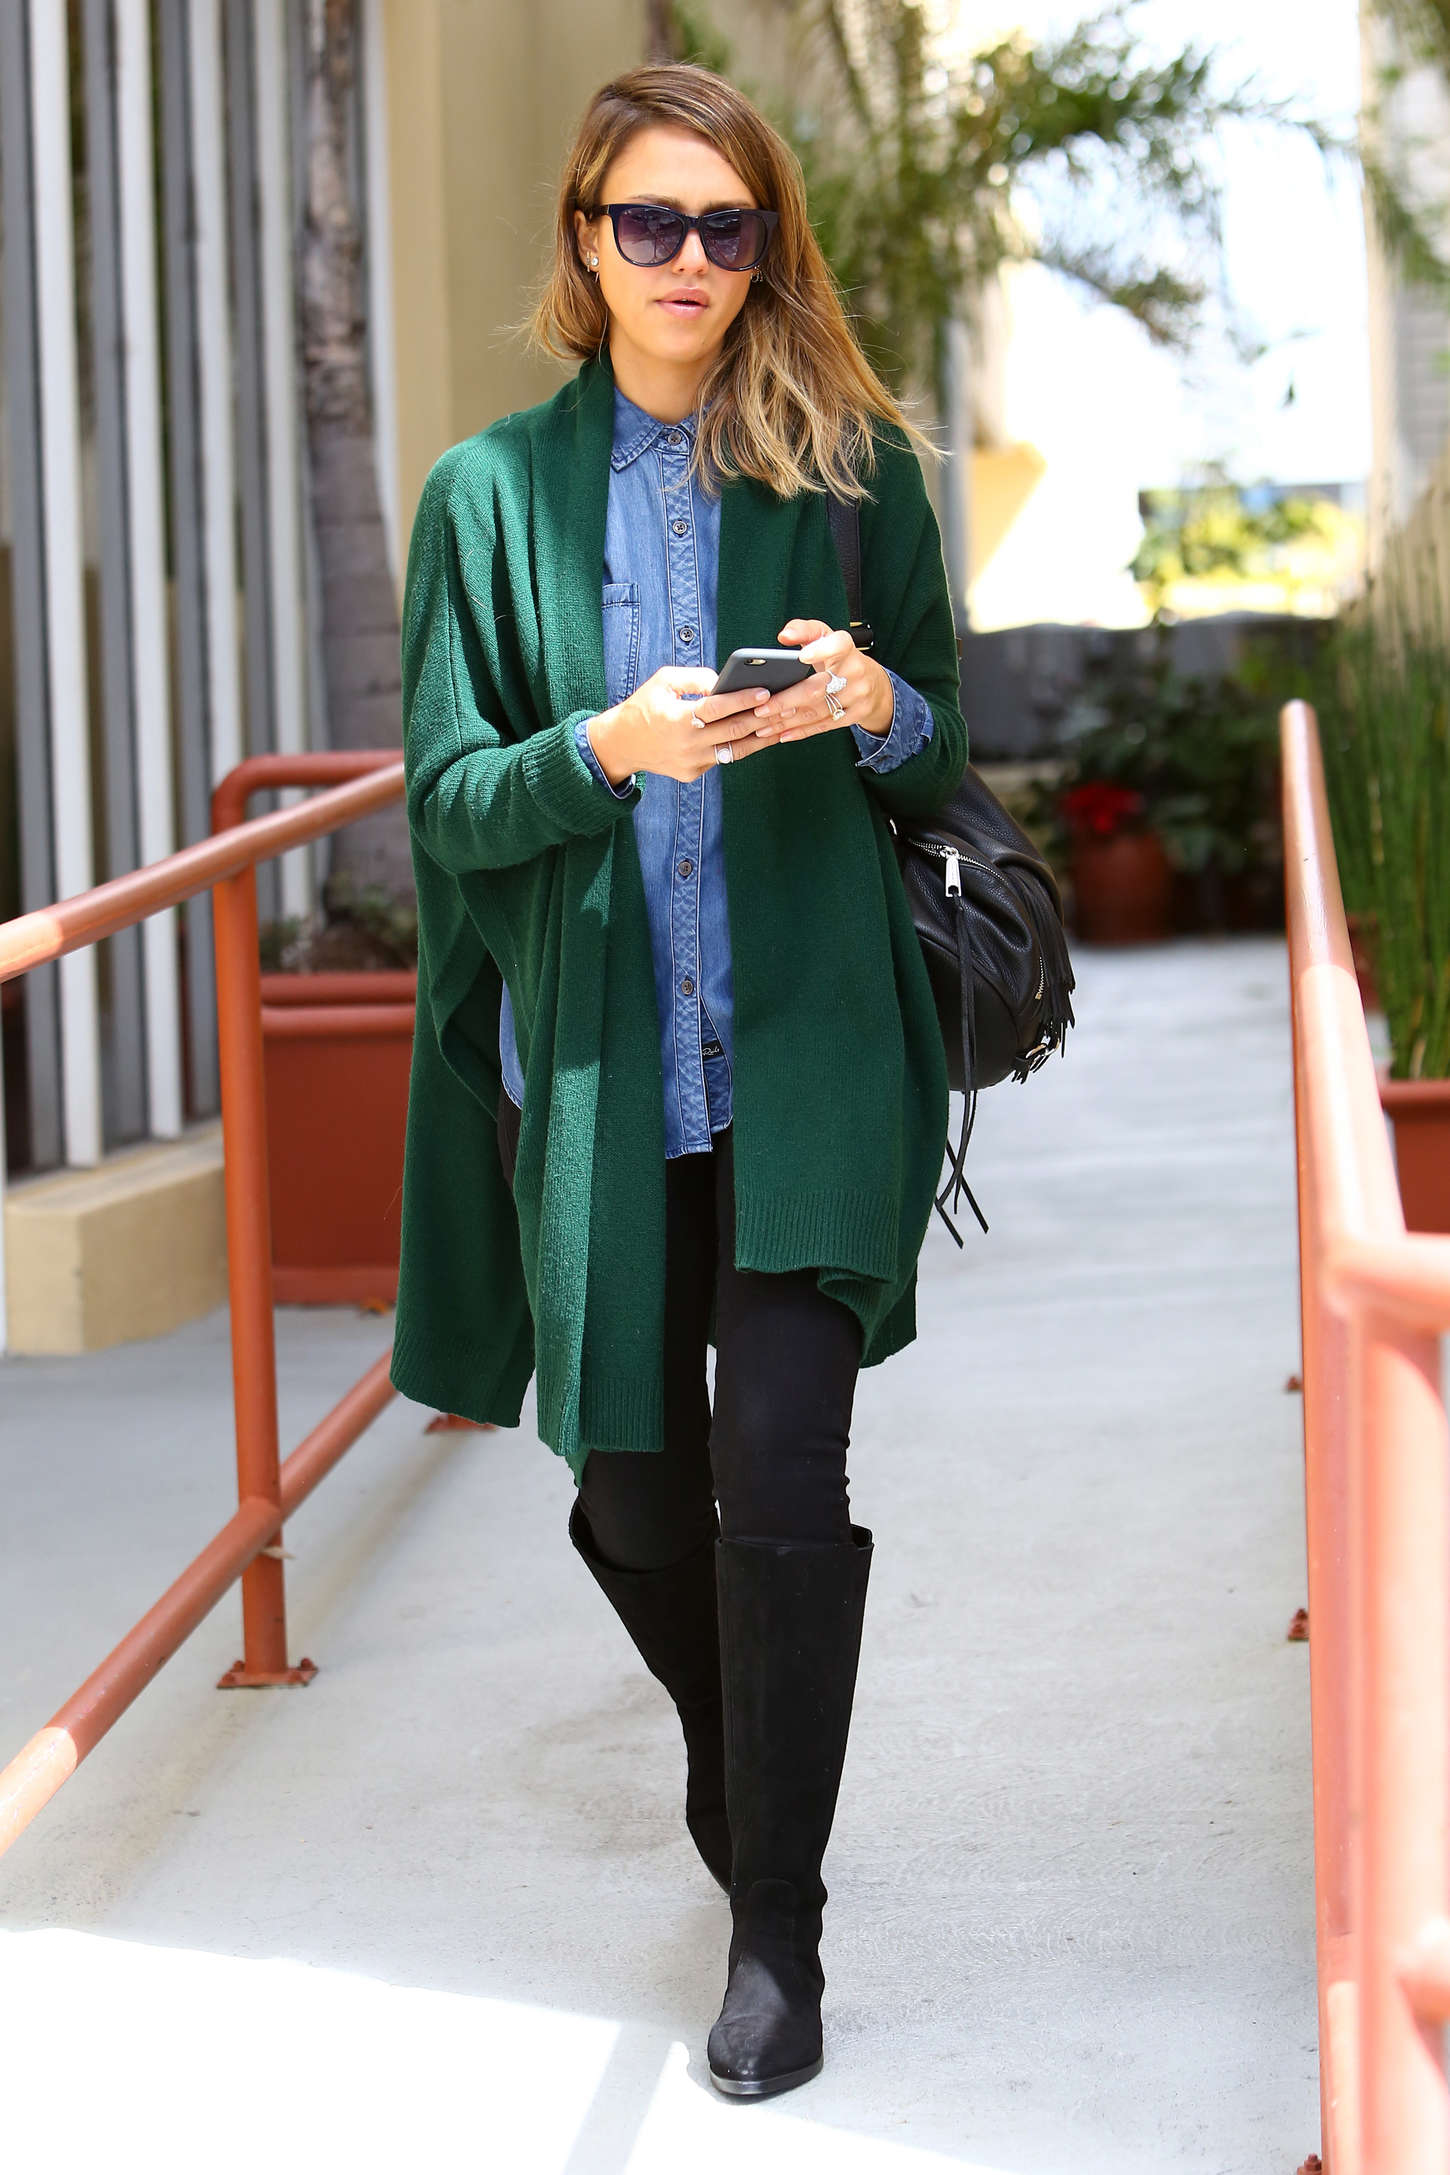 http://www.gotceleb.com/wp-content/uploads/photos/jessica-alba/in-green-sweaters-out-in-santa-monica/Jessica-Alba-in-Green-Sweaters--16.jpg